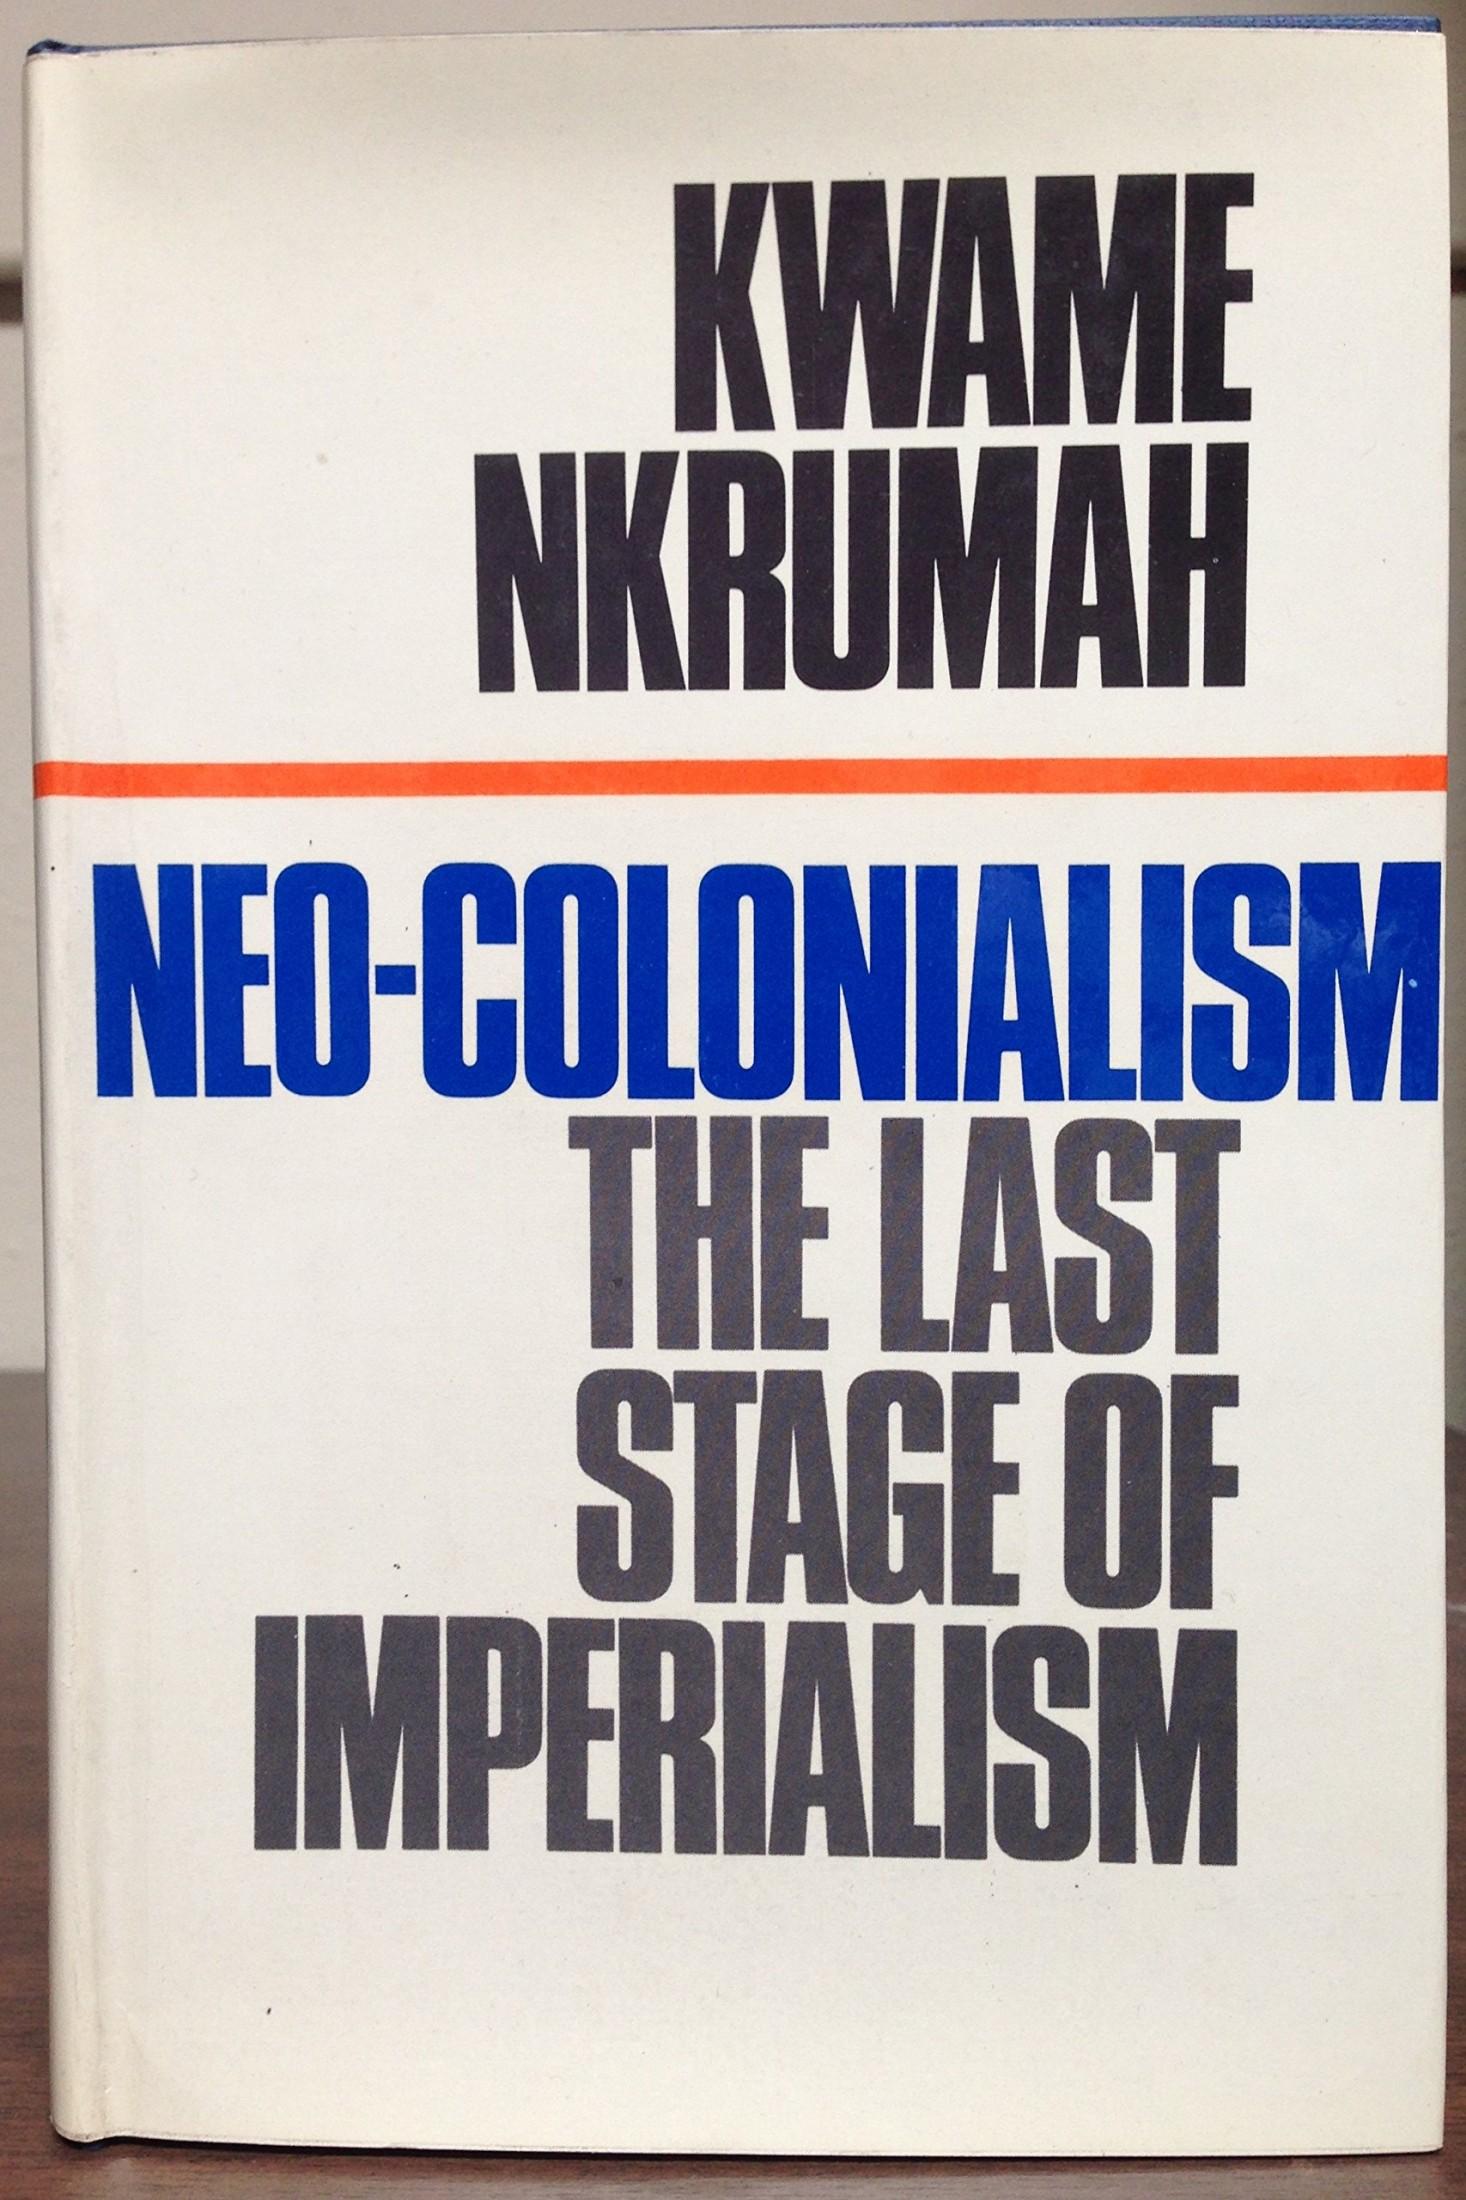 Neo-Colonialism: The Last Stage of Imperialism (1966) by Kwame Nkrumah